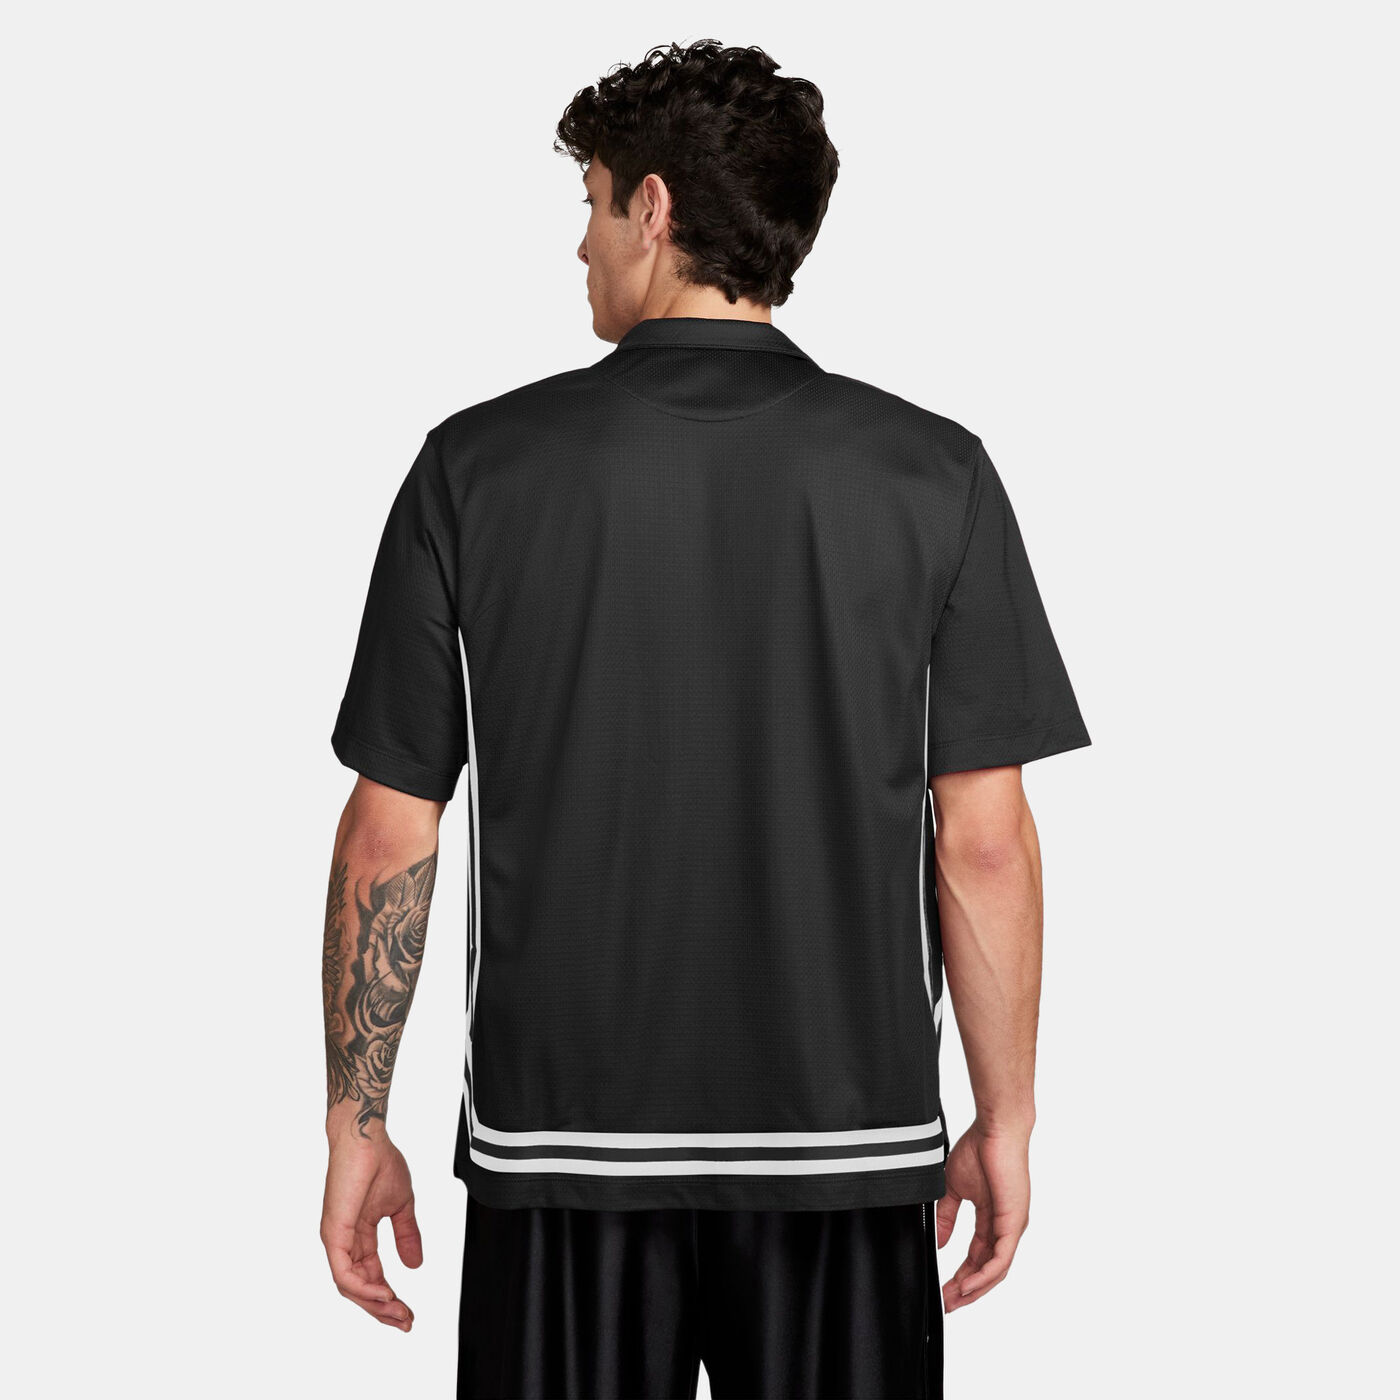 Men's DNA Crossover Dri-FIT Basketball Polo Shirt